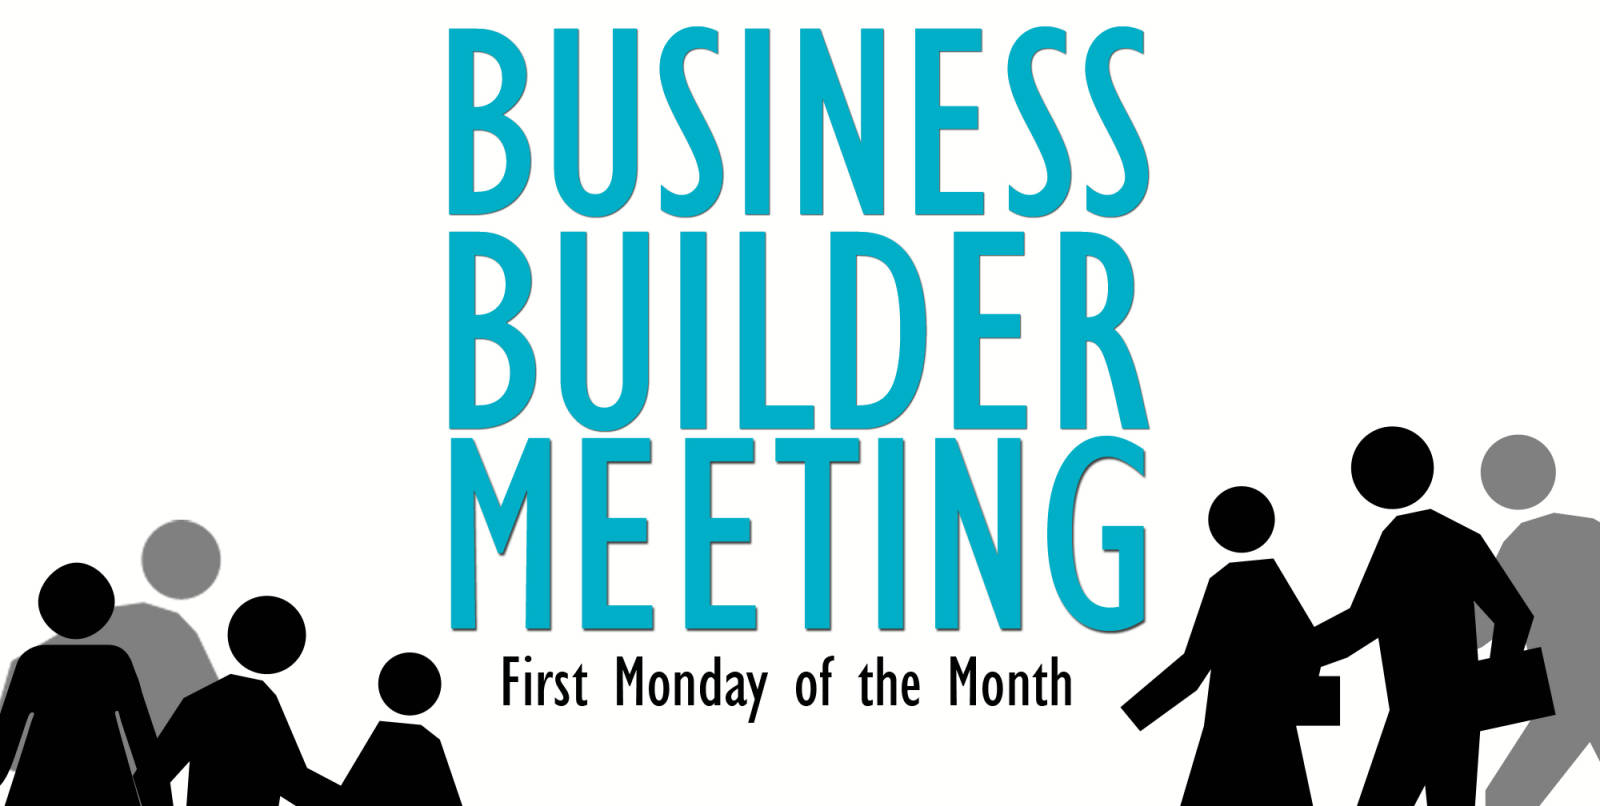 February Business Builder Meeting